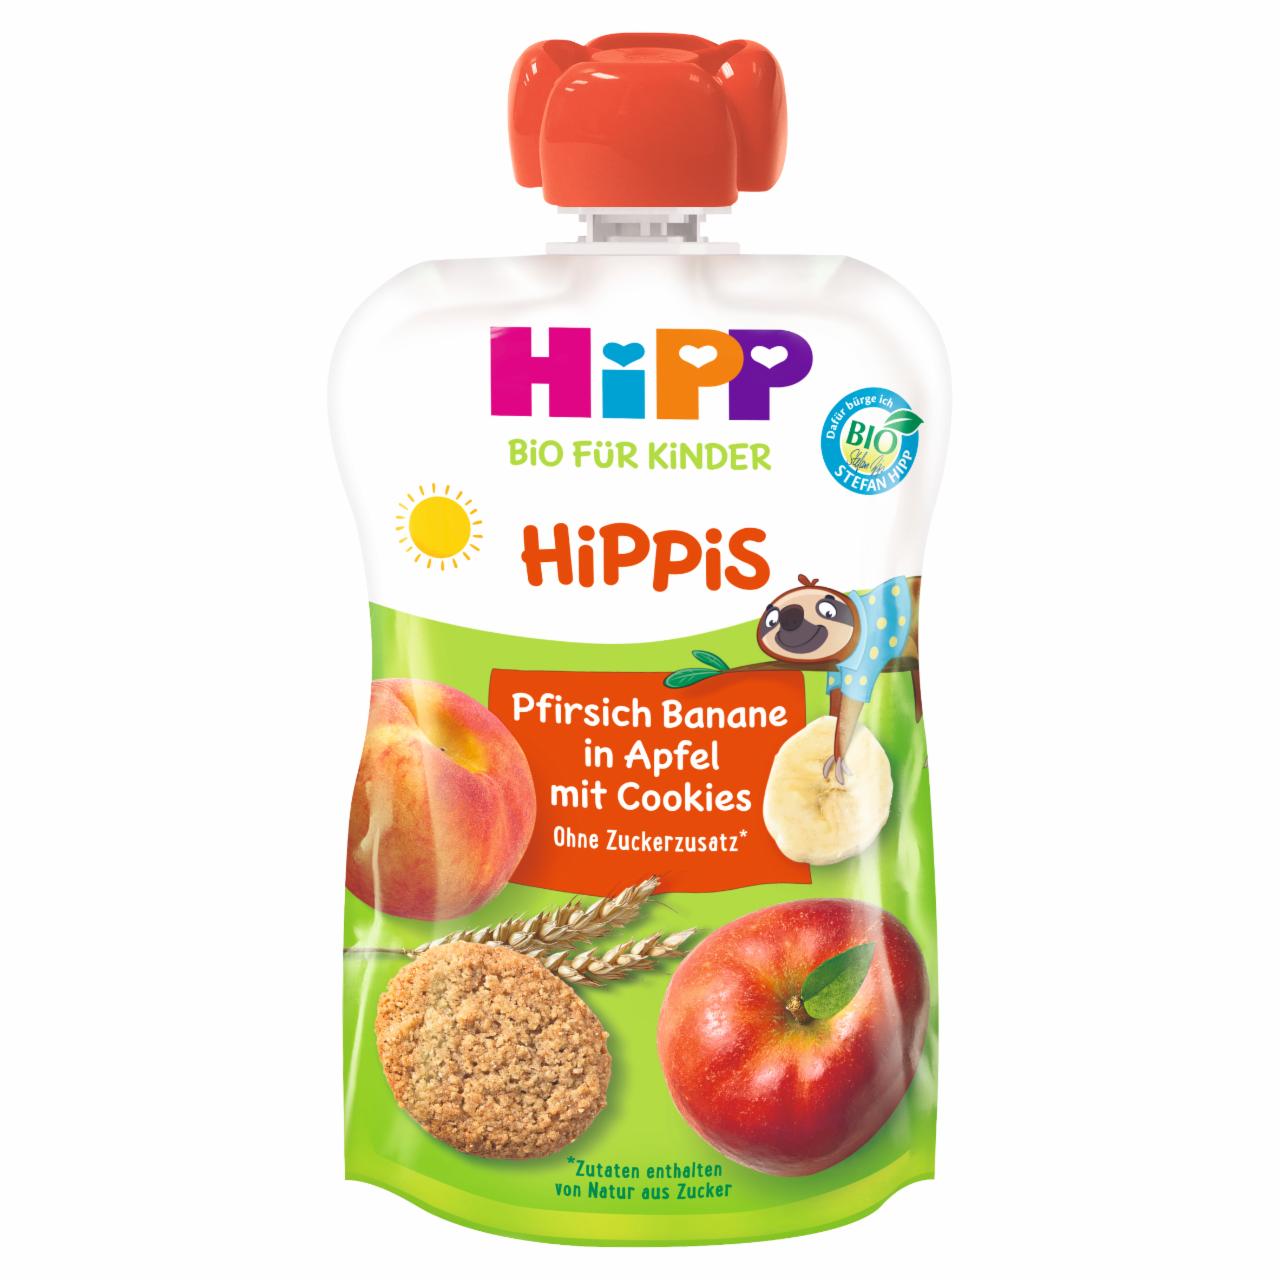 Photo - HiPP BIO HiPPiS Apples-Peaches-Bananas with Cookies Fruit Mousse after 1. Year Onwards 100 g